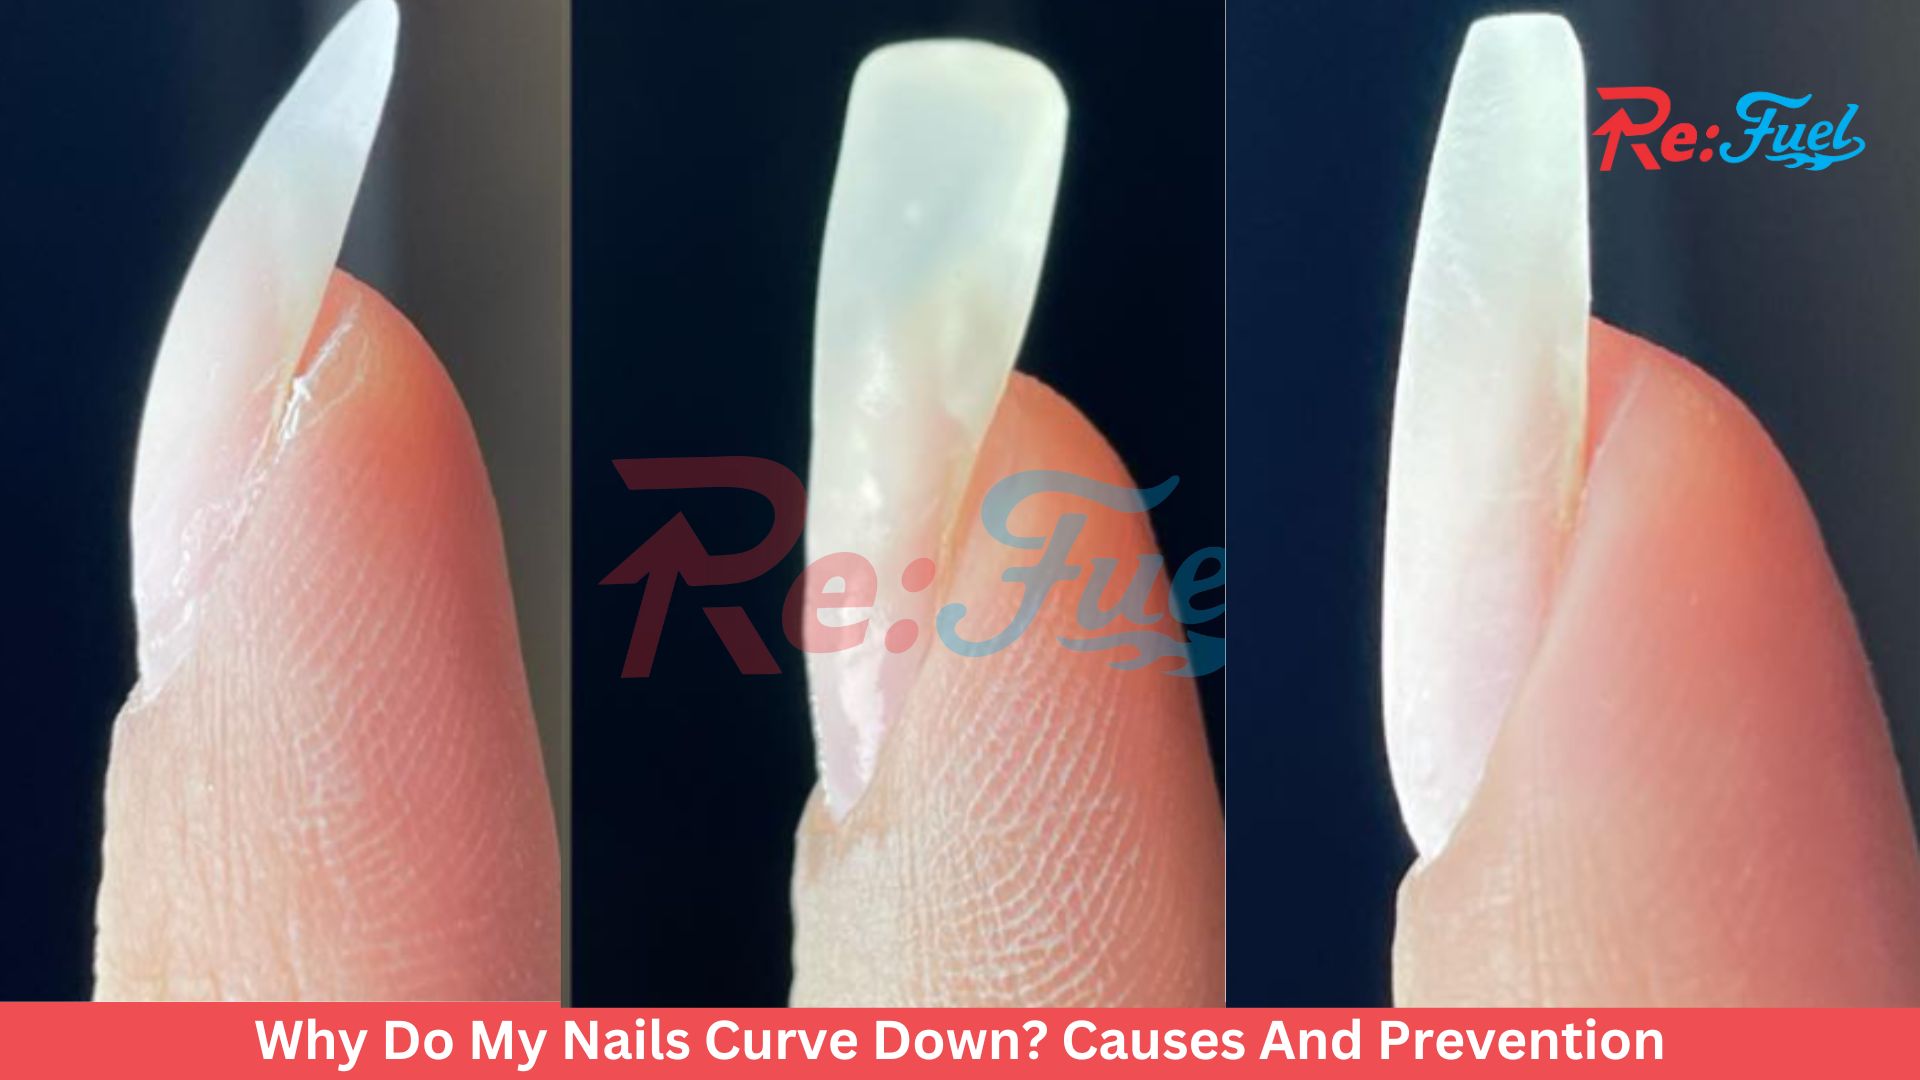 Why Do My Nails Curve Down? Causes And Prevention